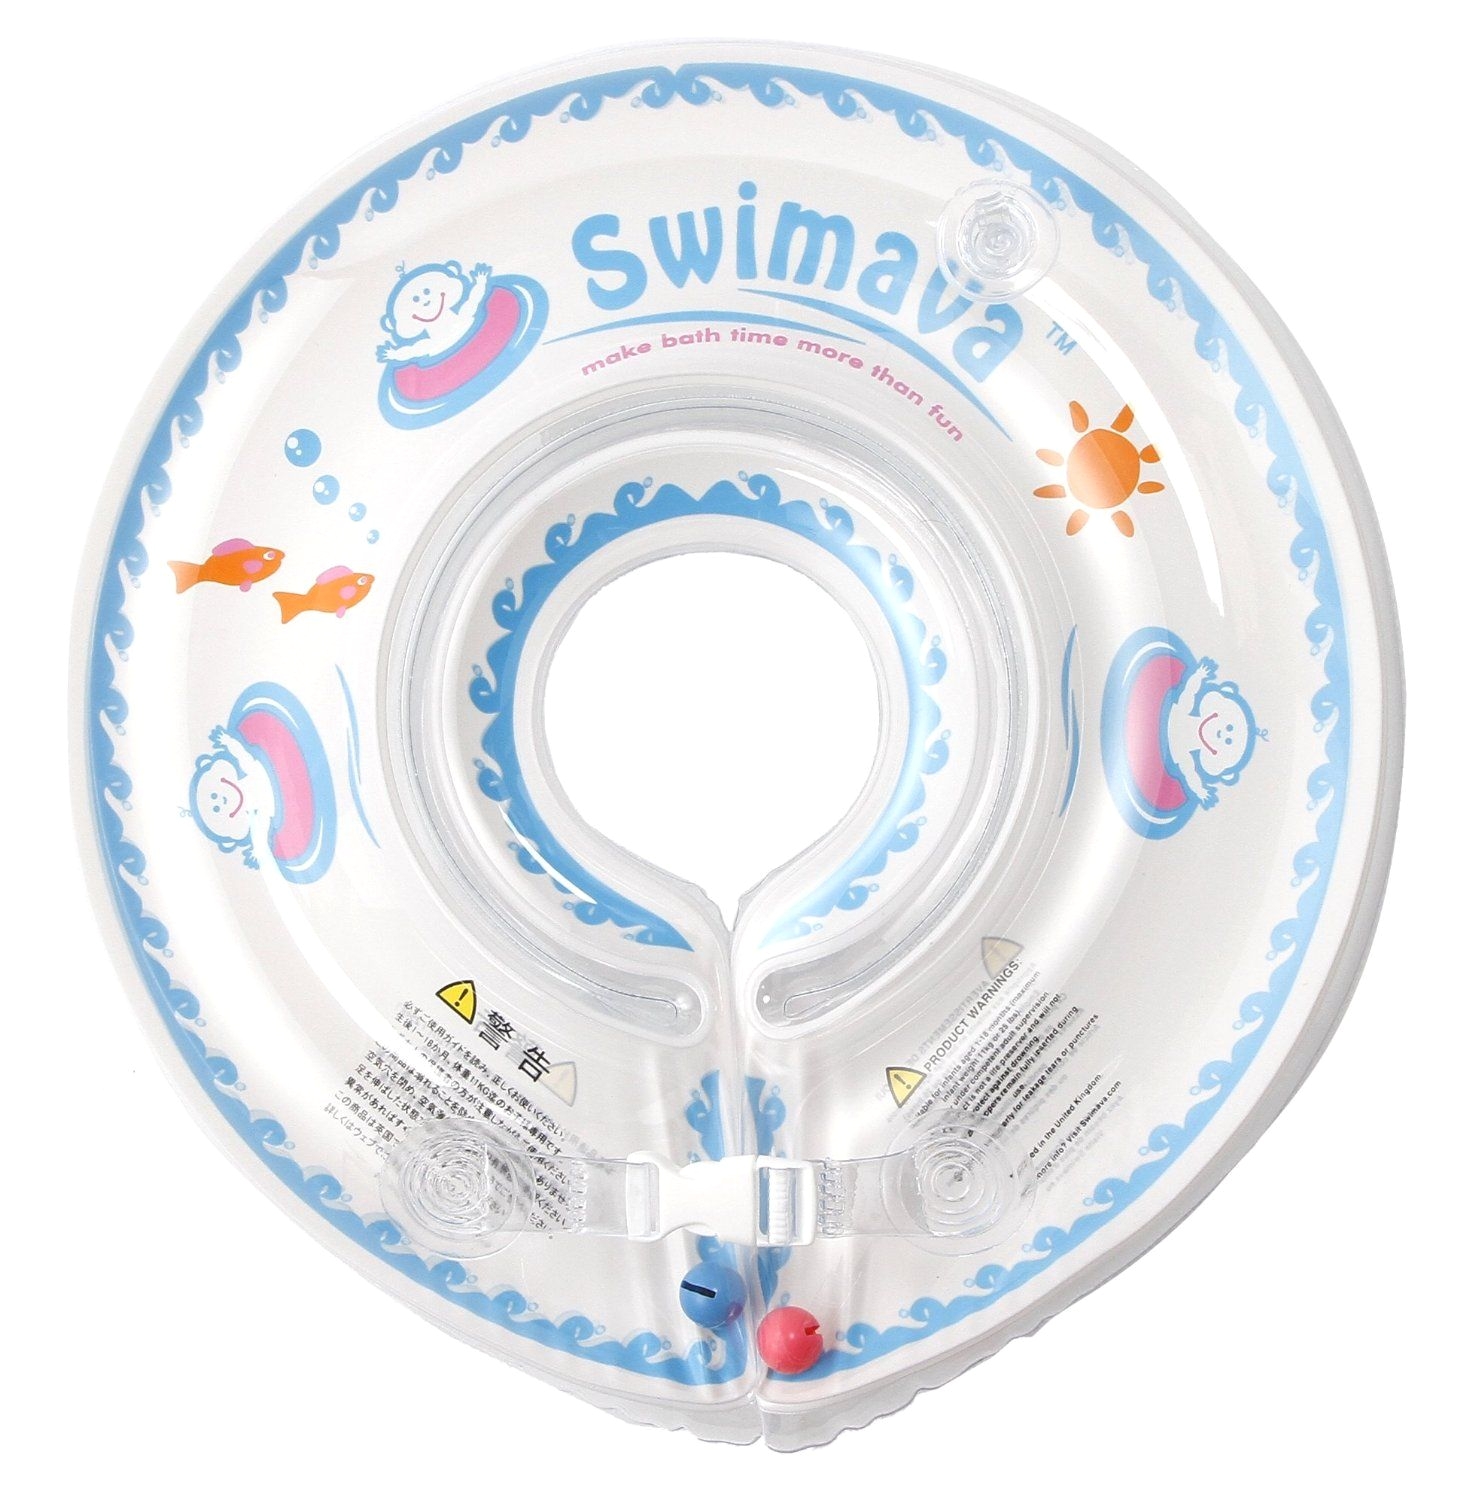 swimava ring heard good things so i ordered one for zac so he can swim in the tub